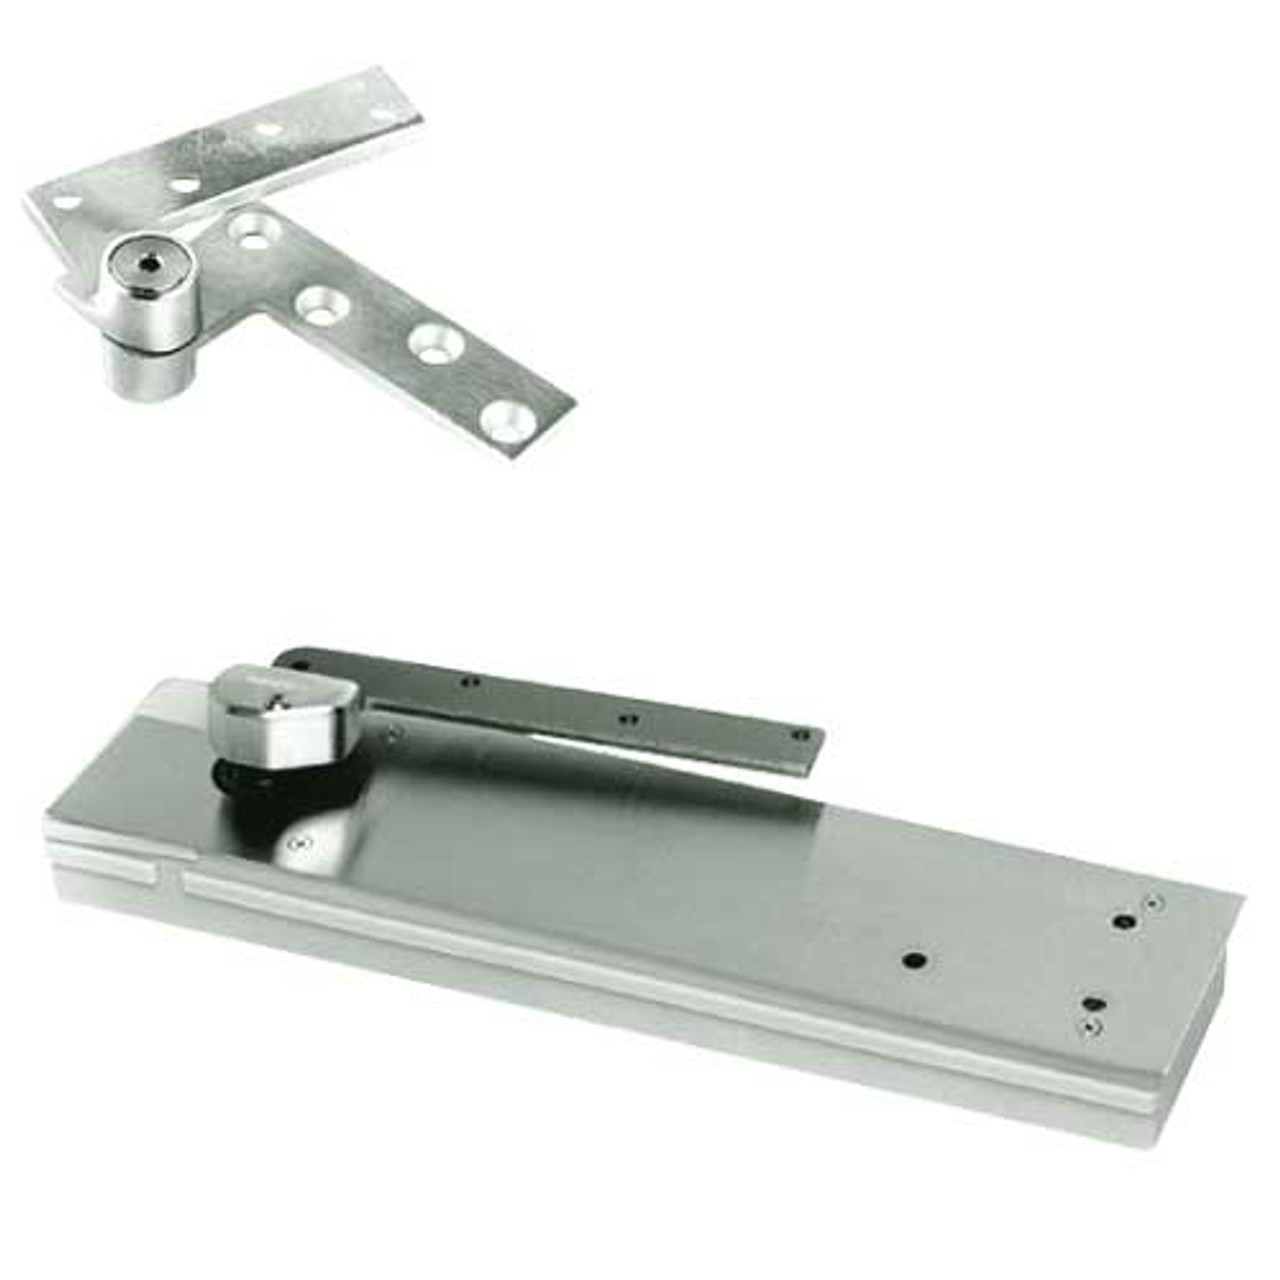 5105ABC105-1-1/2OS-LFP-LTP-RH-618 Rixson 51 Series 1-1/2" Offset Hung Shallow Depth Floor Closers in Bright Nickel Finish